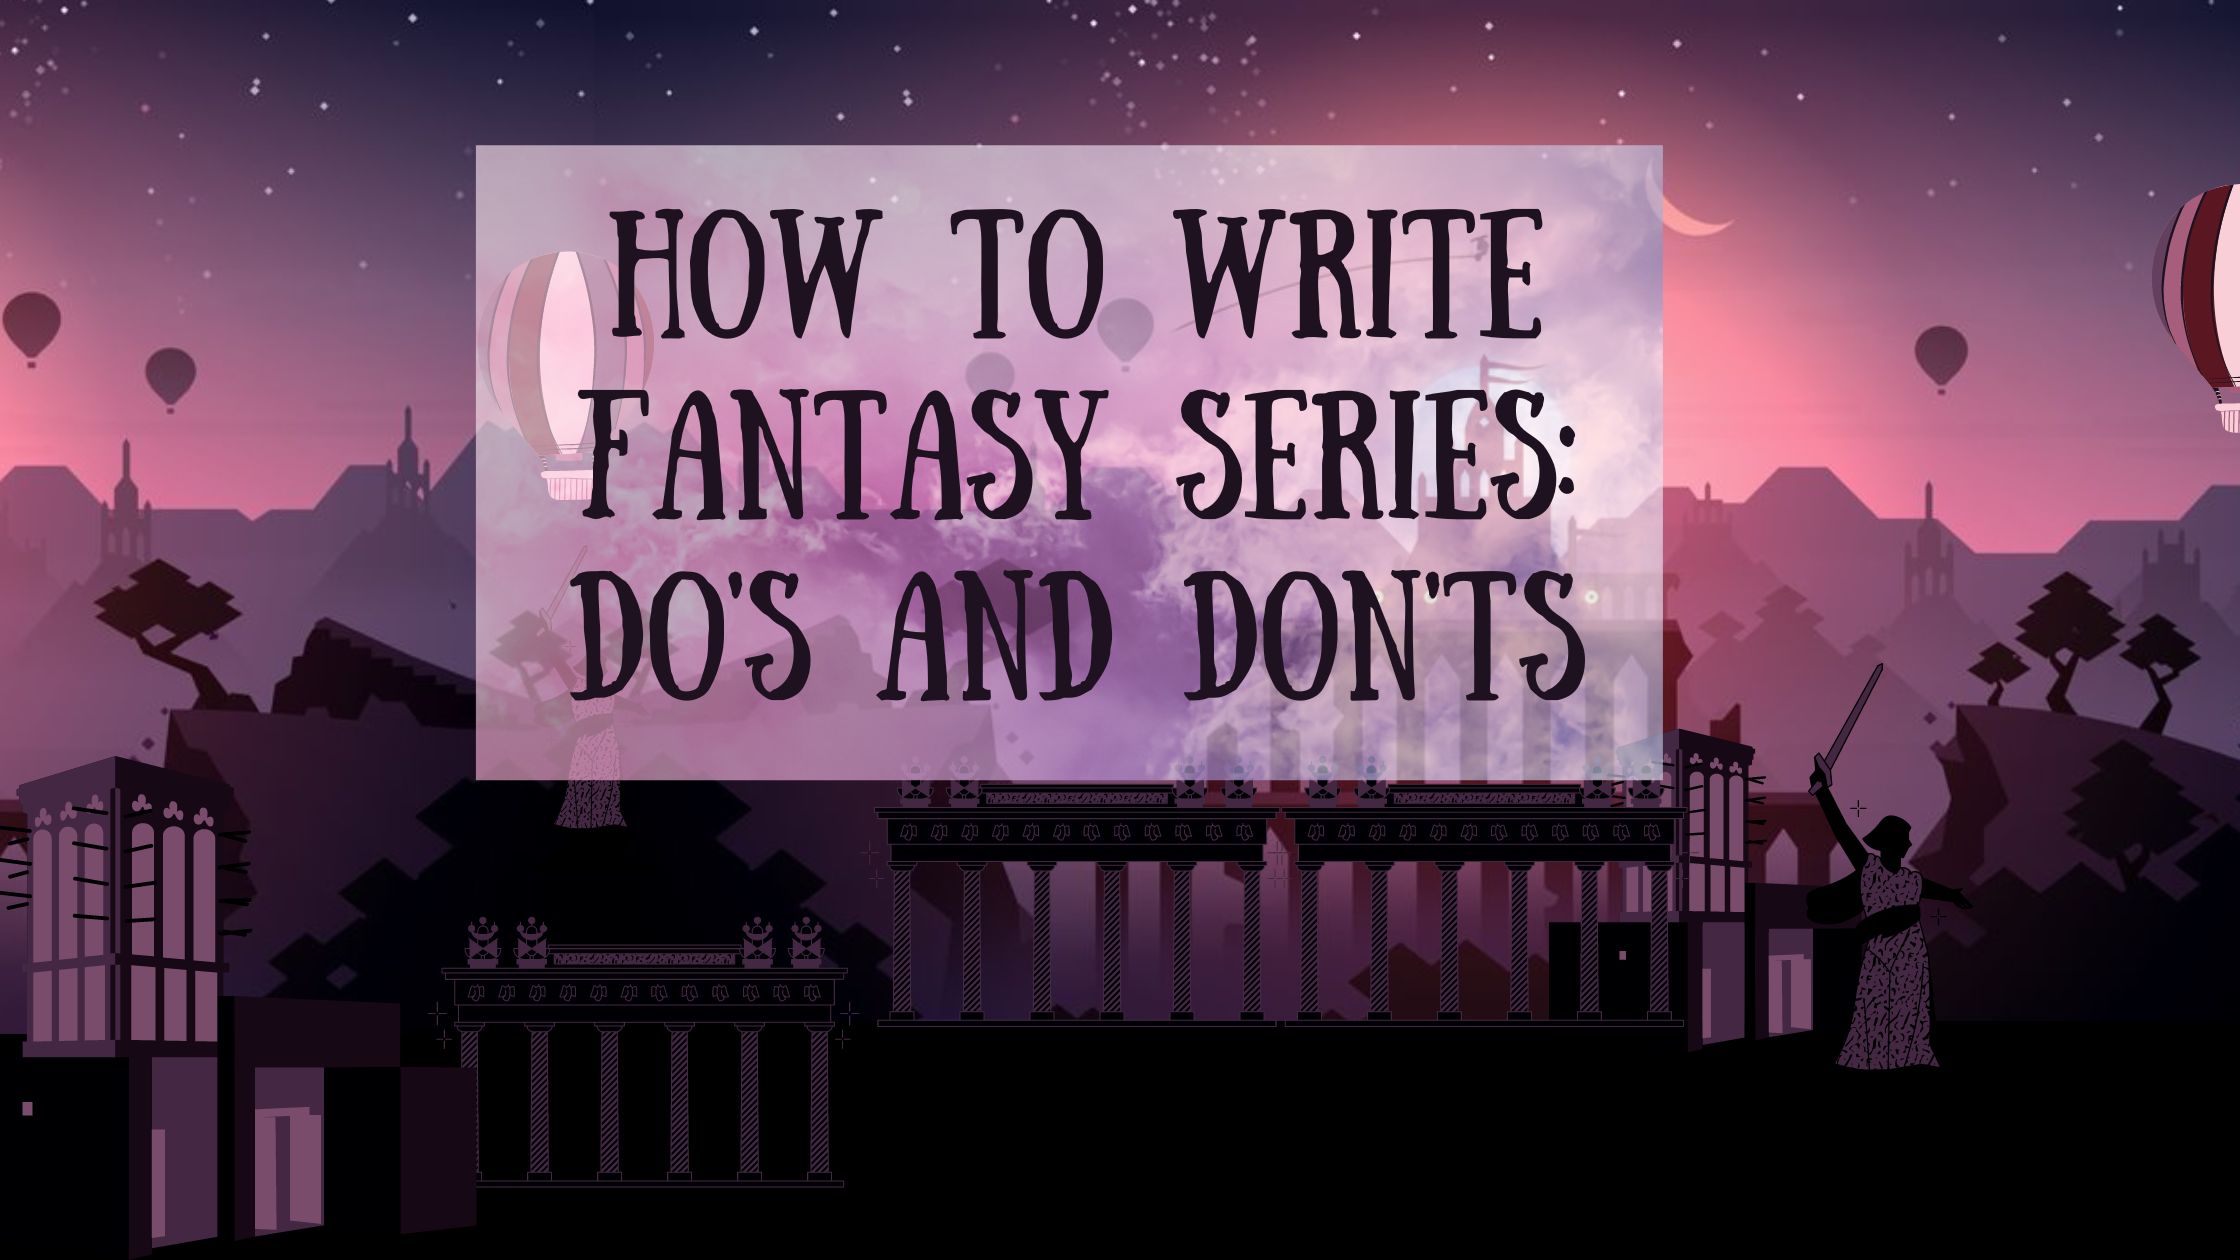 How to write fantasy series: Do’s and don’ts